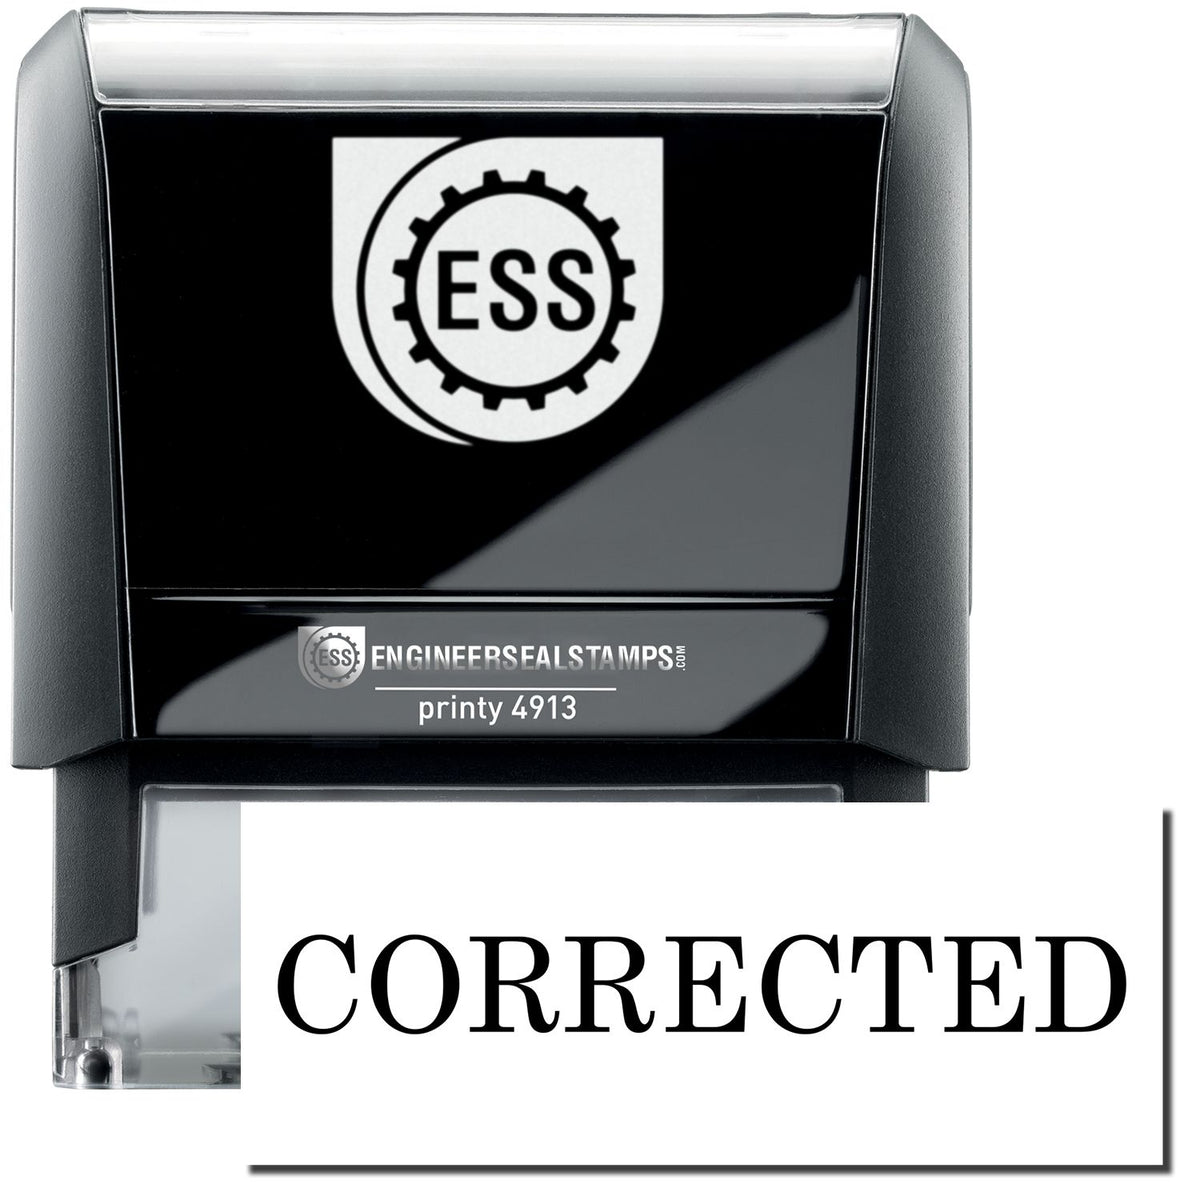 A self-inking stamp with a stamped image showing how the text &quot;CORRECTED&quot; in a large bold font is displayed by it.